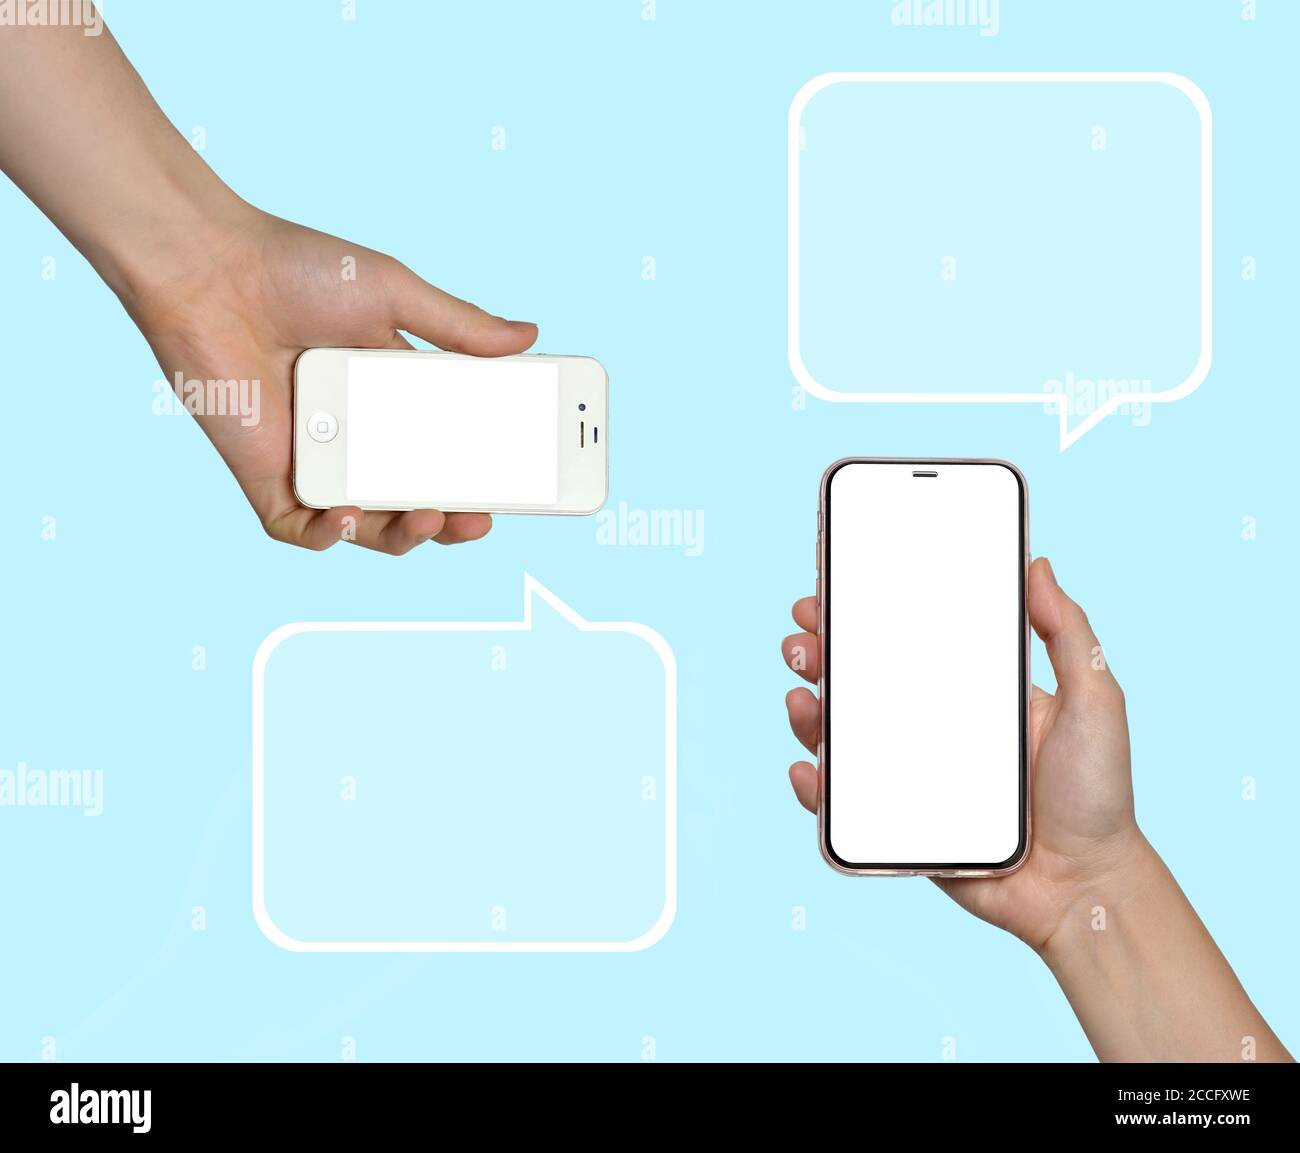 Phone. Woman and man hands holdings the smartphones white background. Outdated model and modern frameless design smartphones Stock Photo